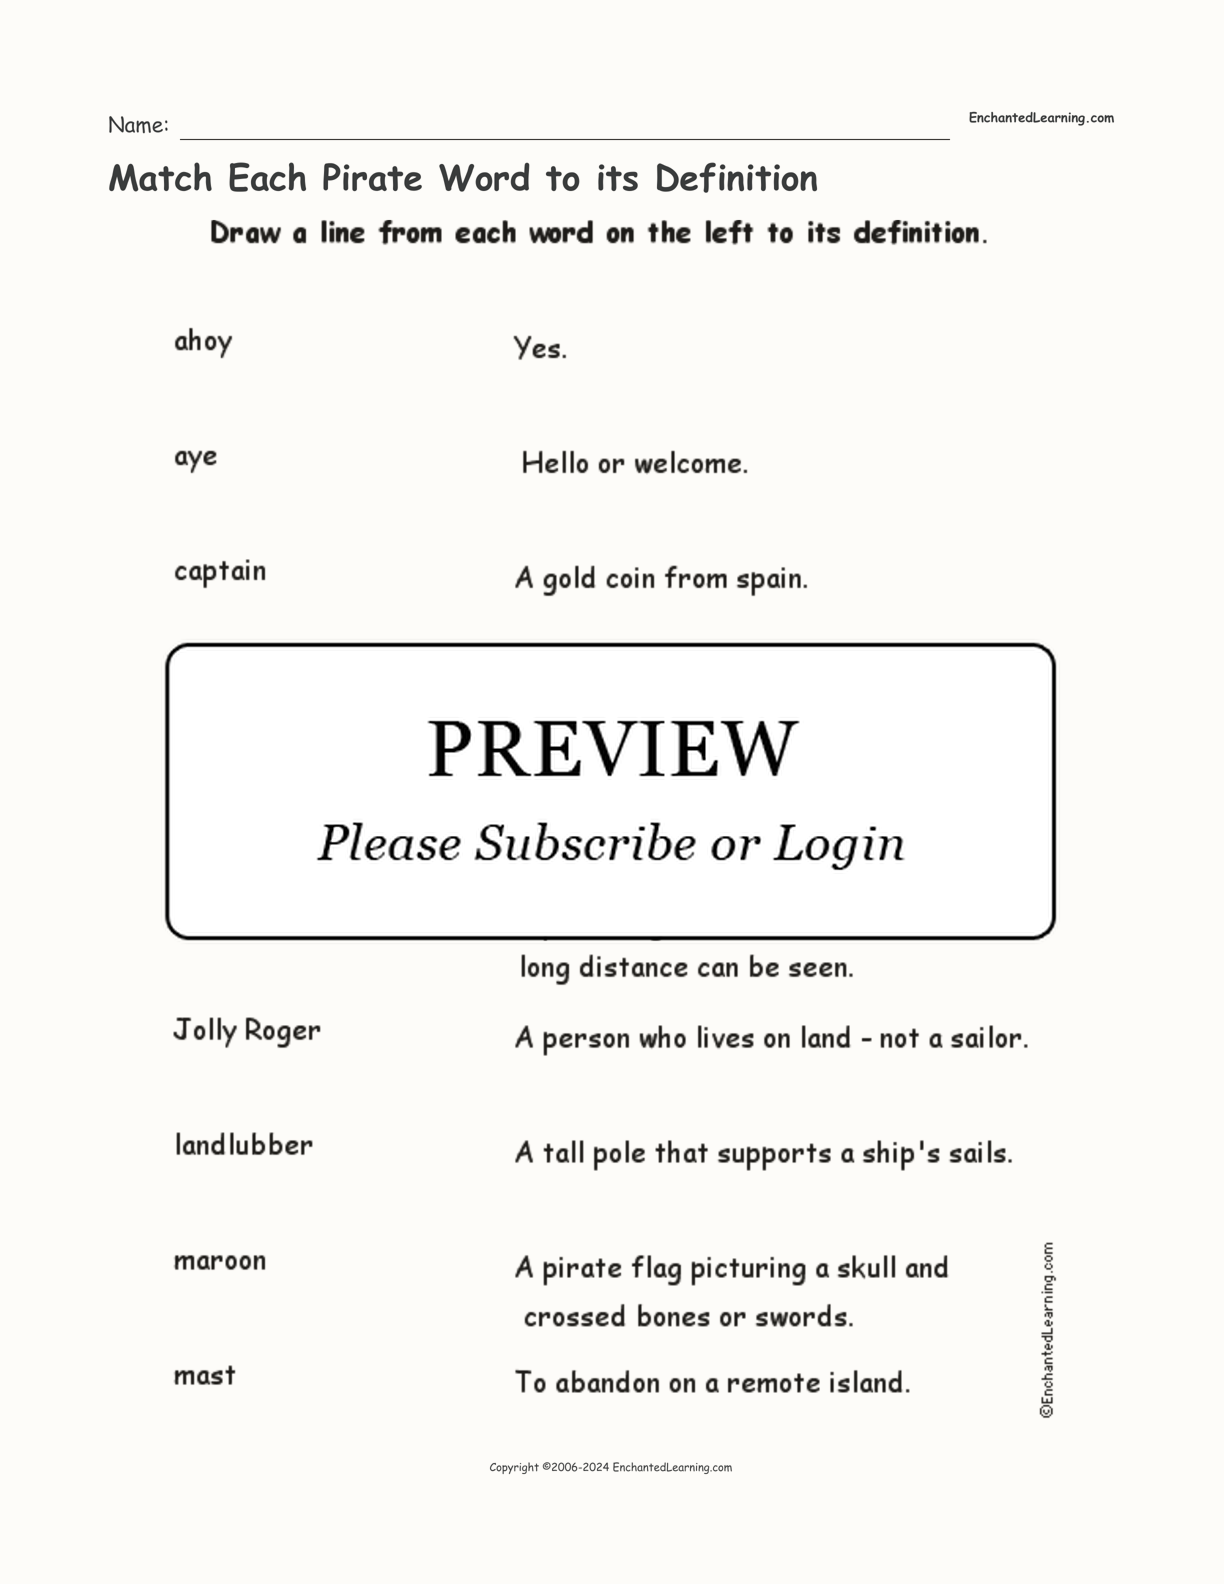 Match Each Pirate Word to its Definition interactive worksheet page 1